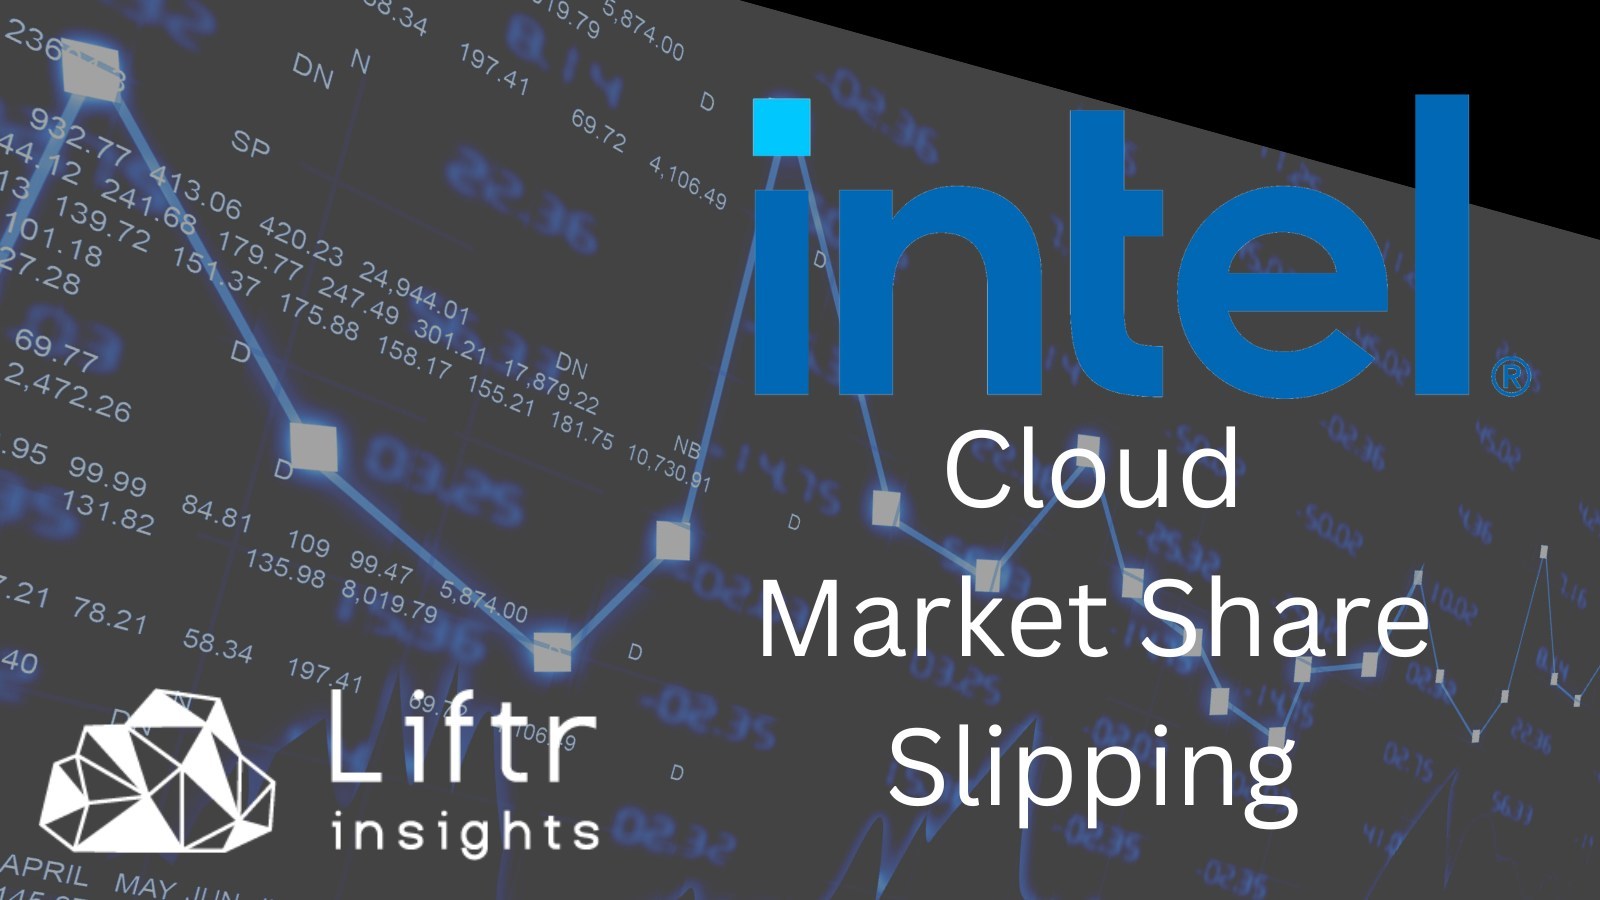 Intel market share slipping in the cloud, as shown by Liftr Insights data